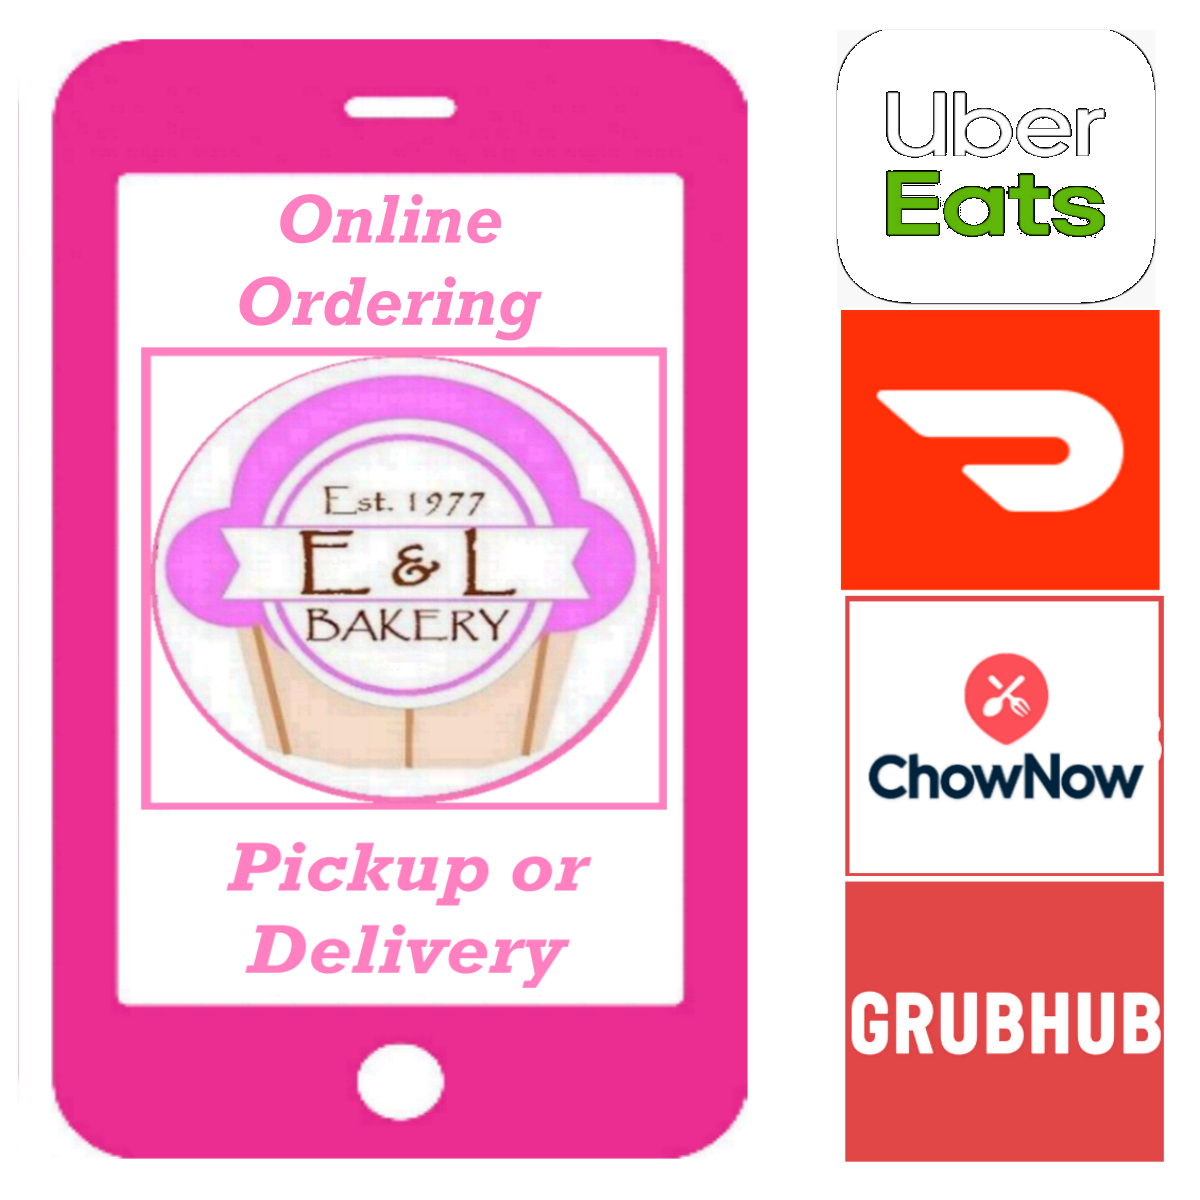 Online Ordering
Pick Up  or Delivery